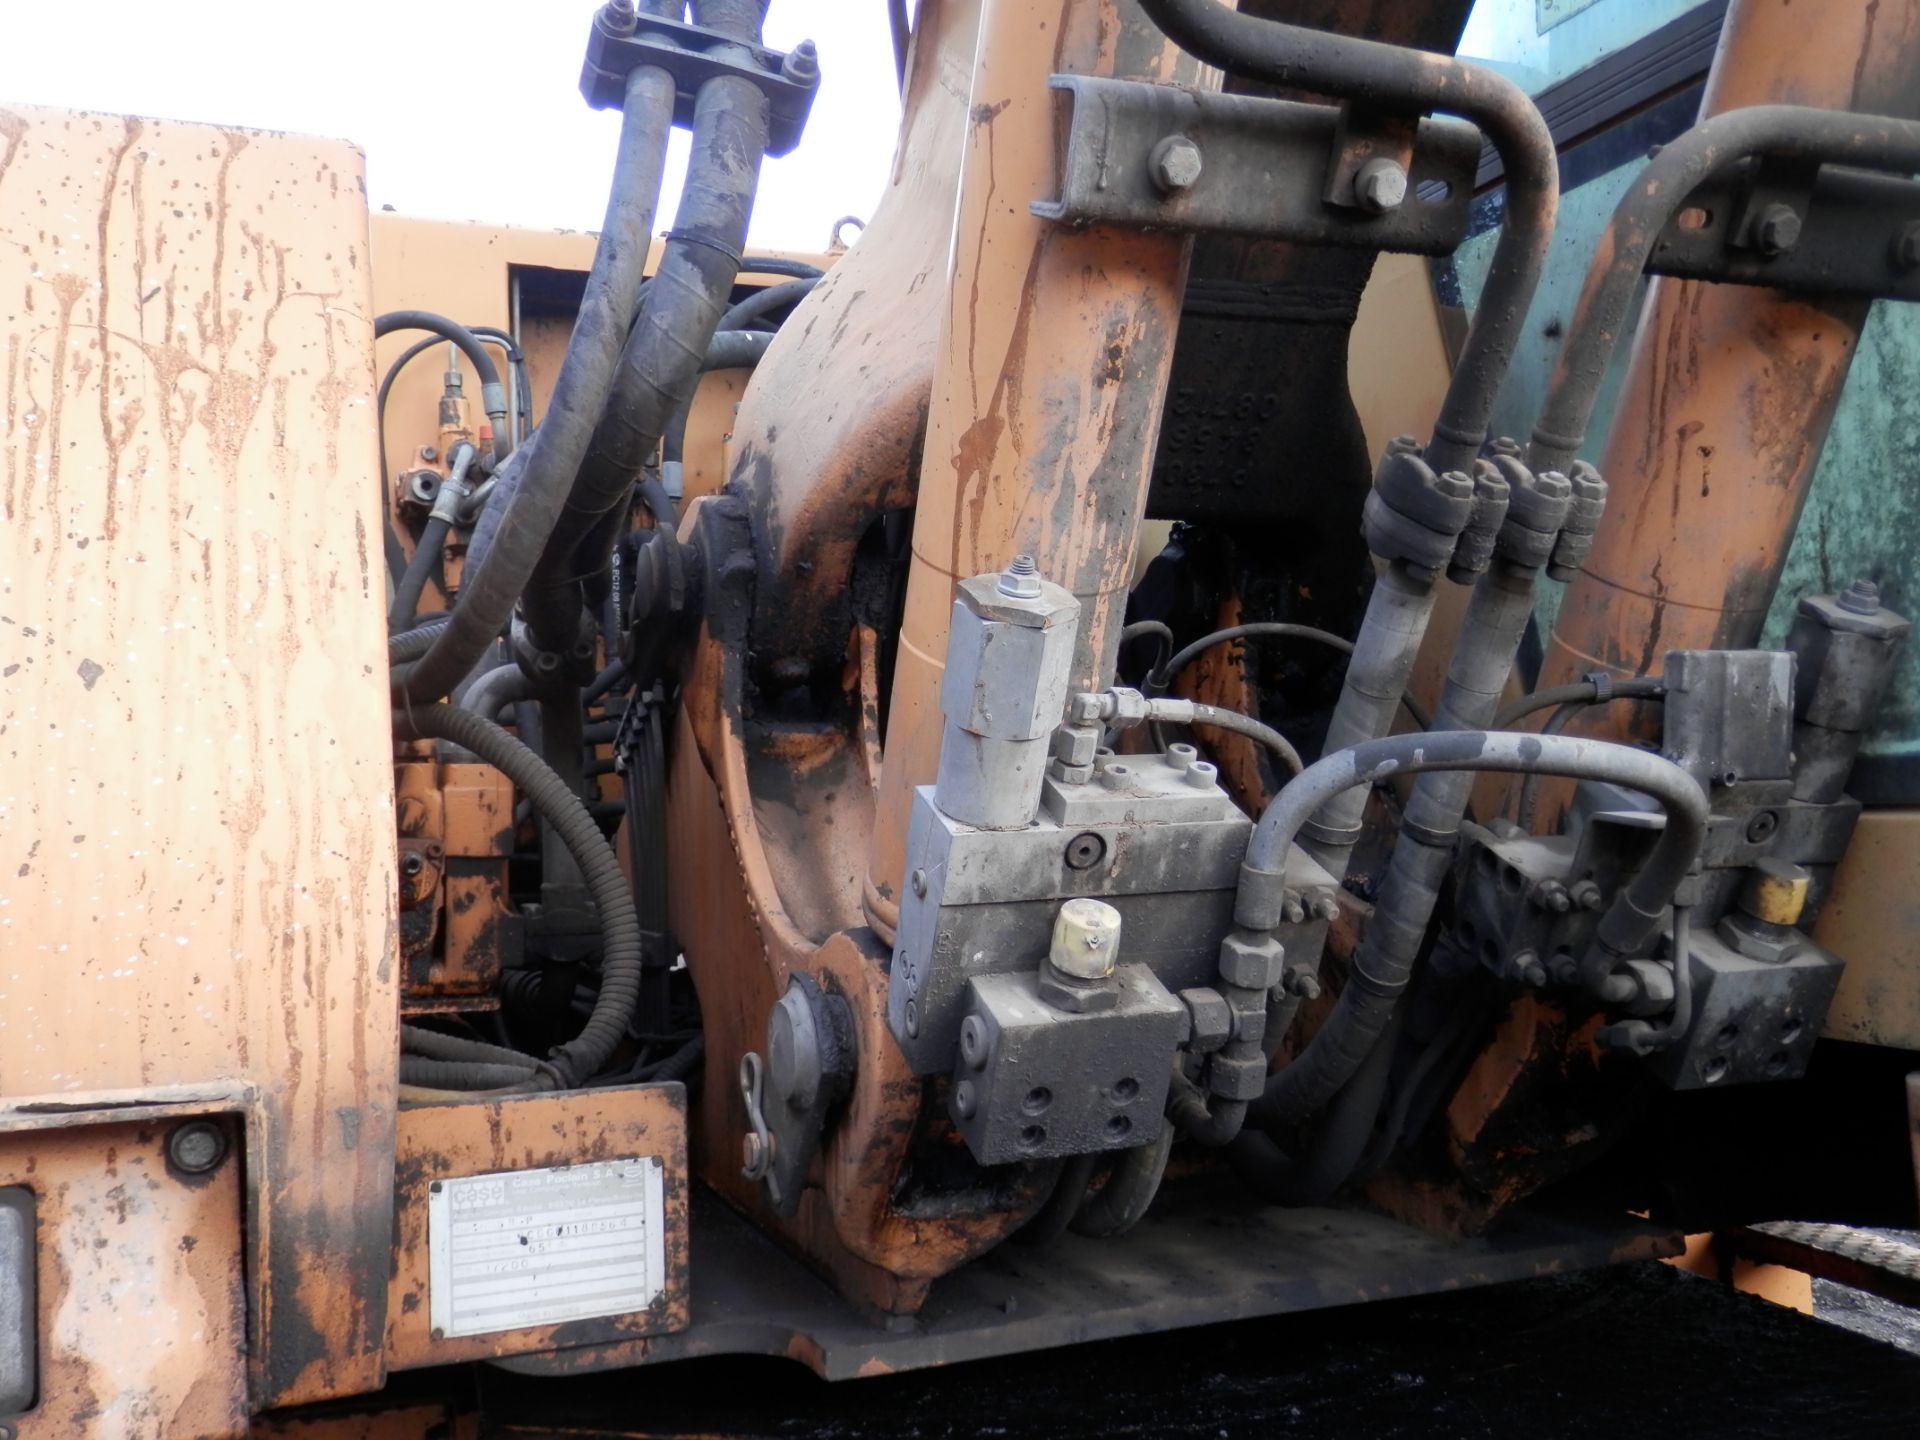 ALL WORKING CASE 688BP 17.2 TONNE DIGGER, 65KW DIESEL ENGINE & MAGNETIC LIFT ATTACHMENT INCLUDED. - Image 8 of 18